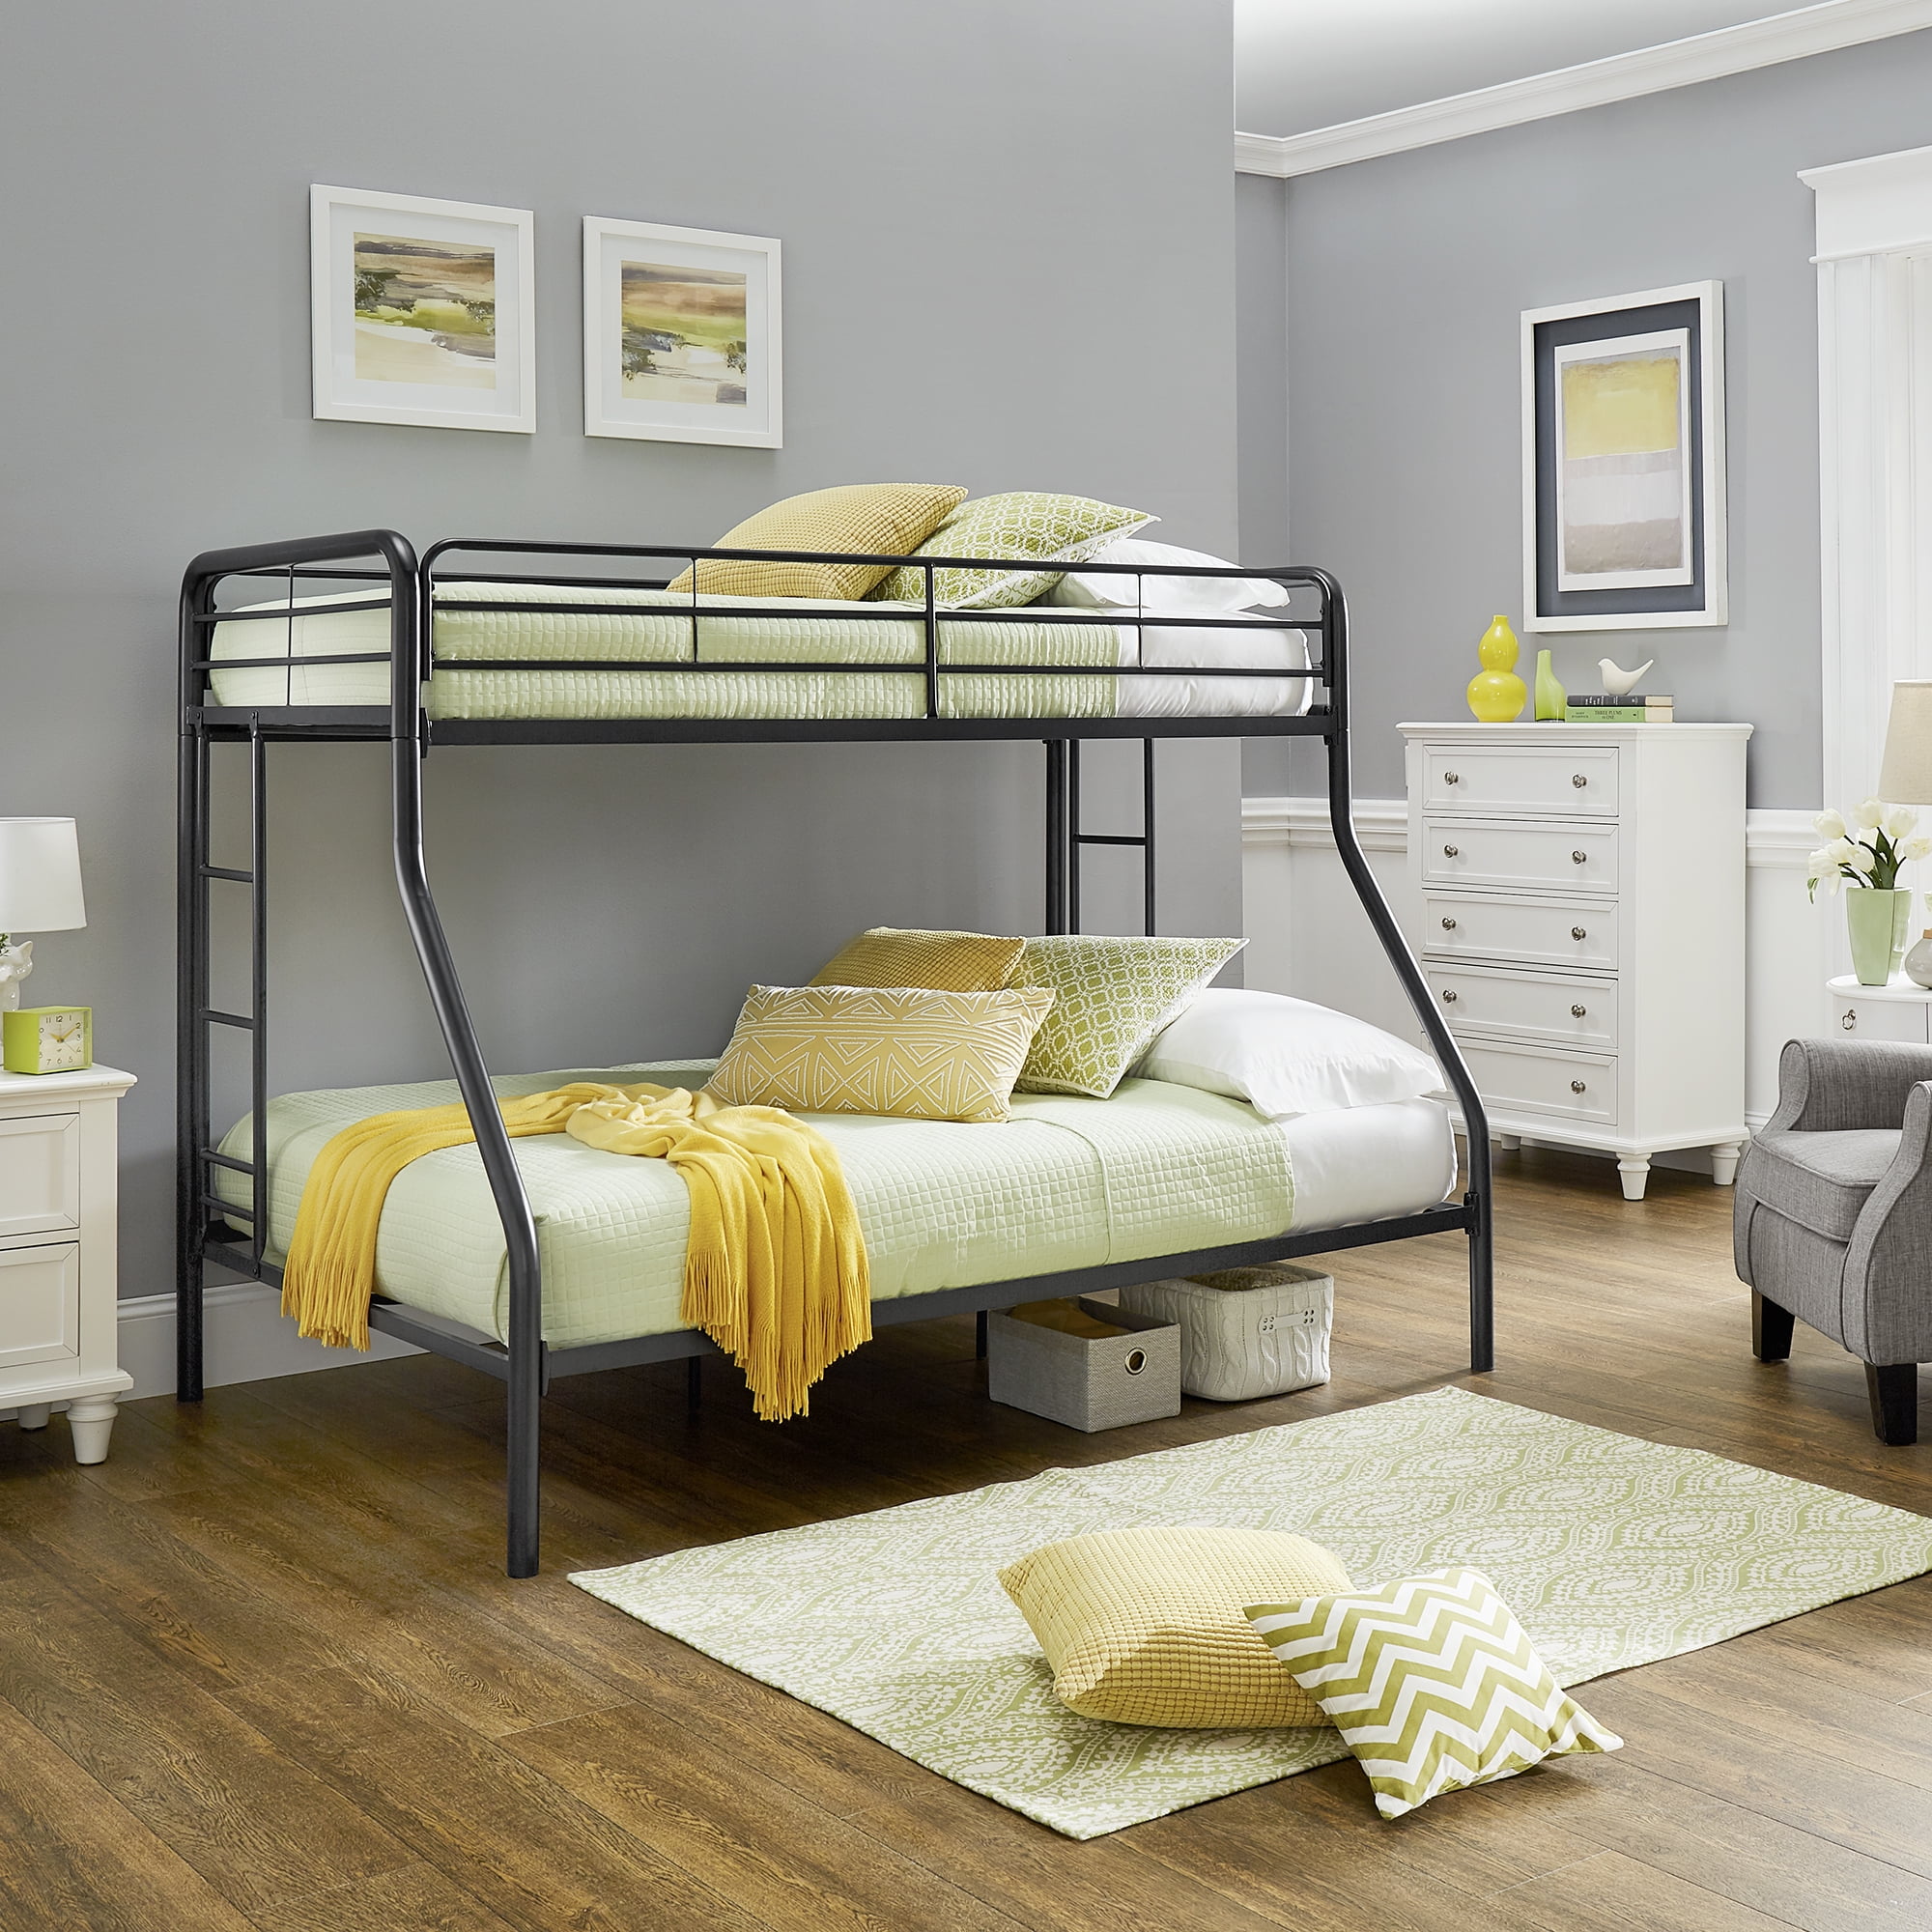 Mainstays Small Space Junior Twin Over, Bob’s Bunk Beds